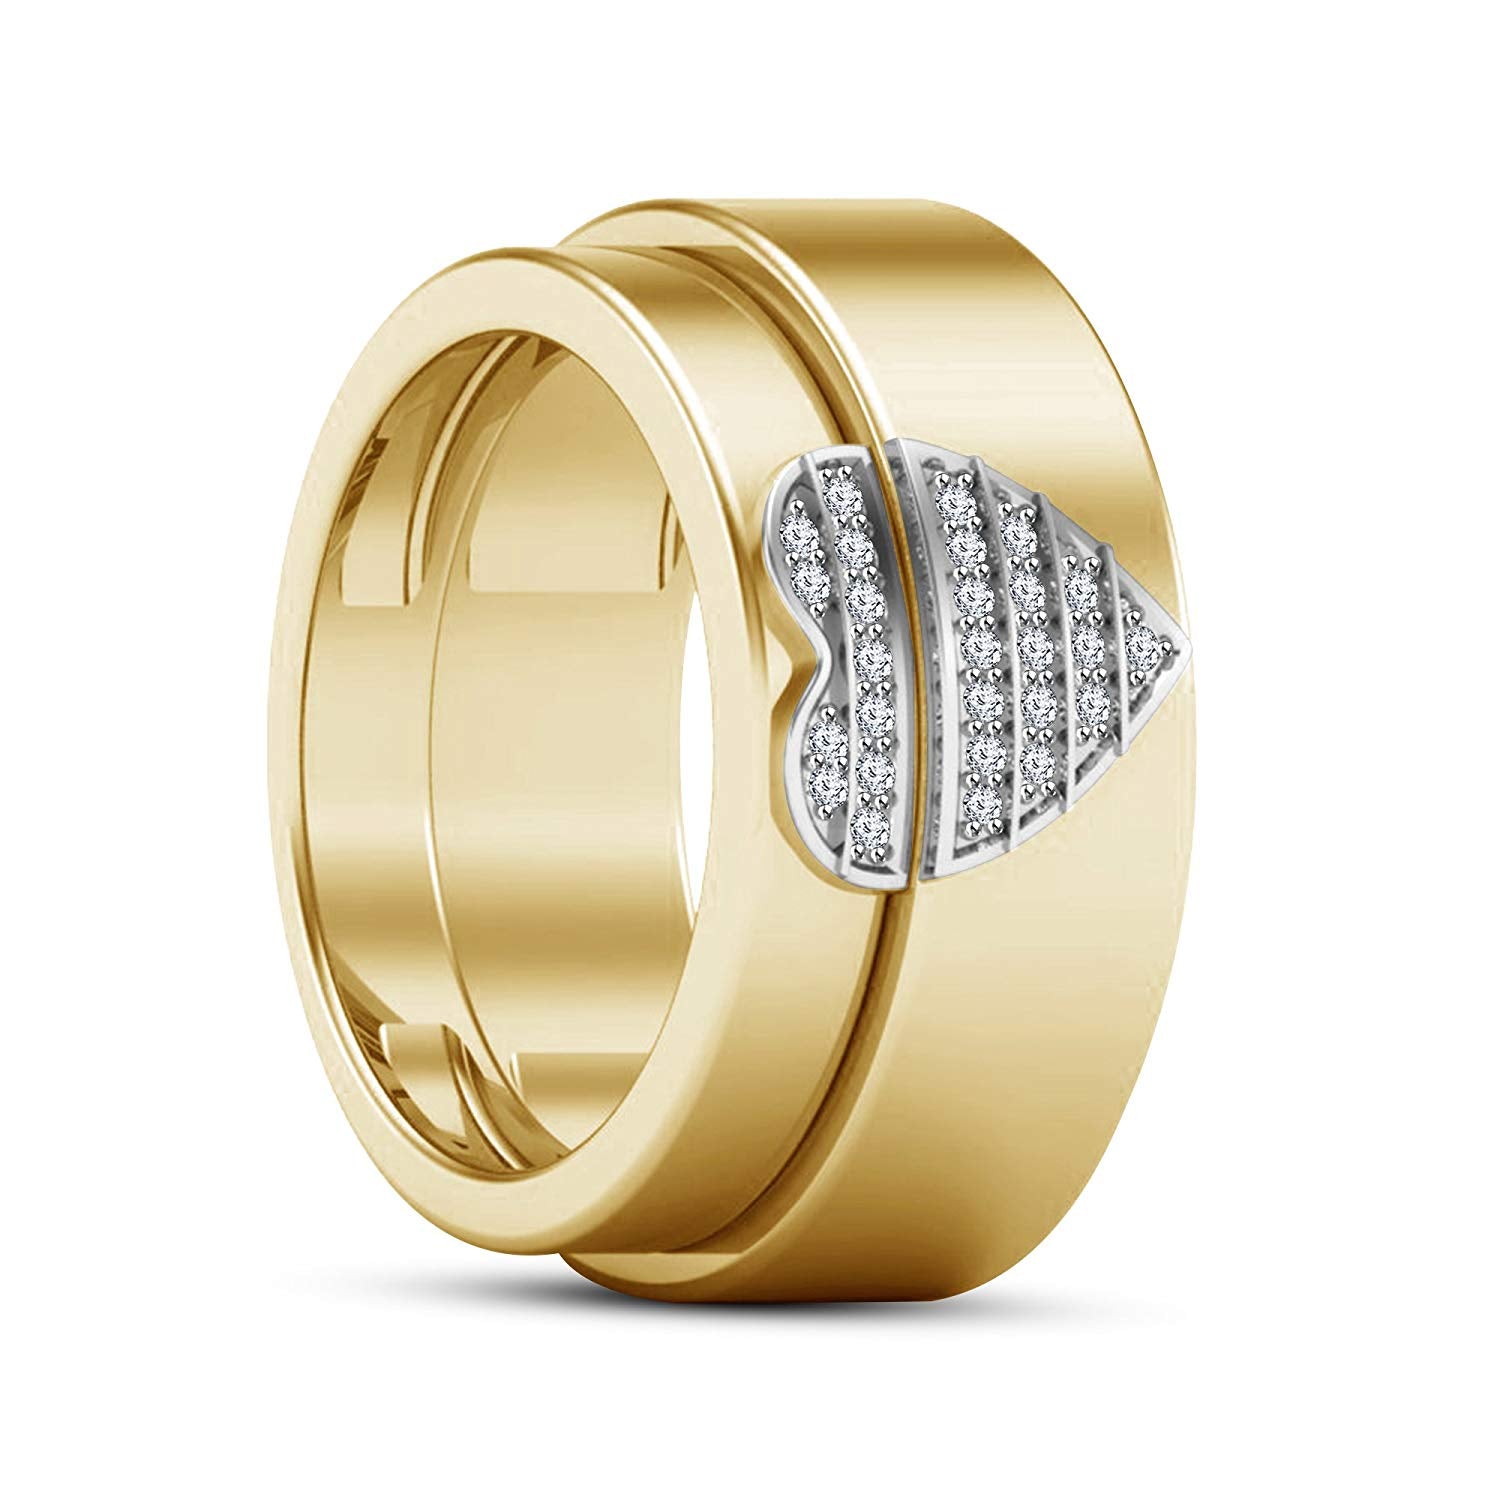 Buy Bridal Wear Gold Ring Design Gold Plated Fashion Ring Online